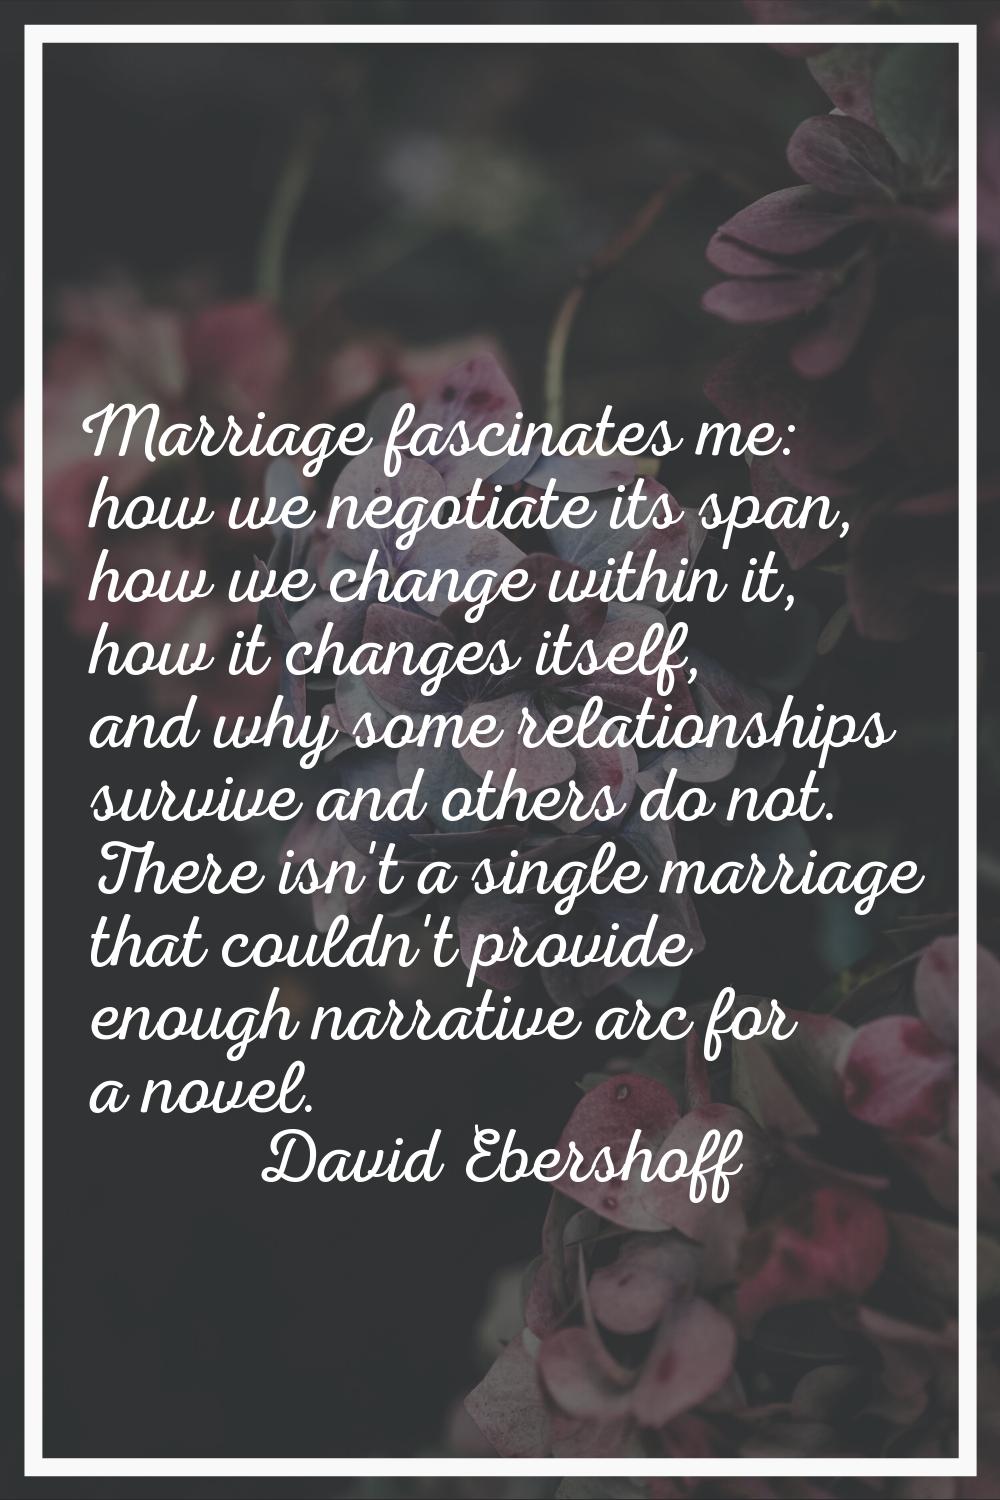 Marriage fascinates me: how we negotiate its span, how we change within it, how it changes itself, 